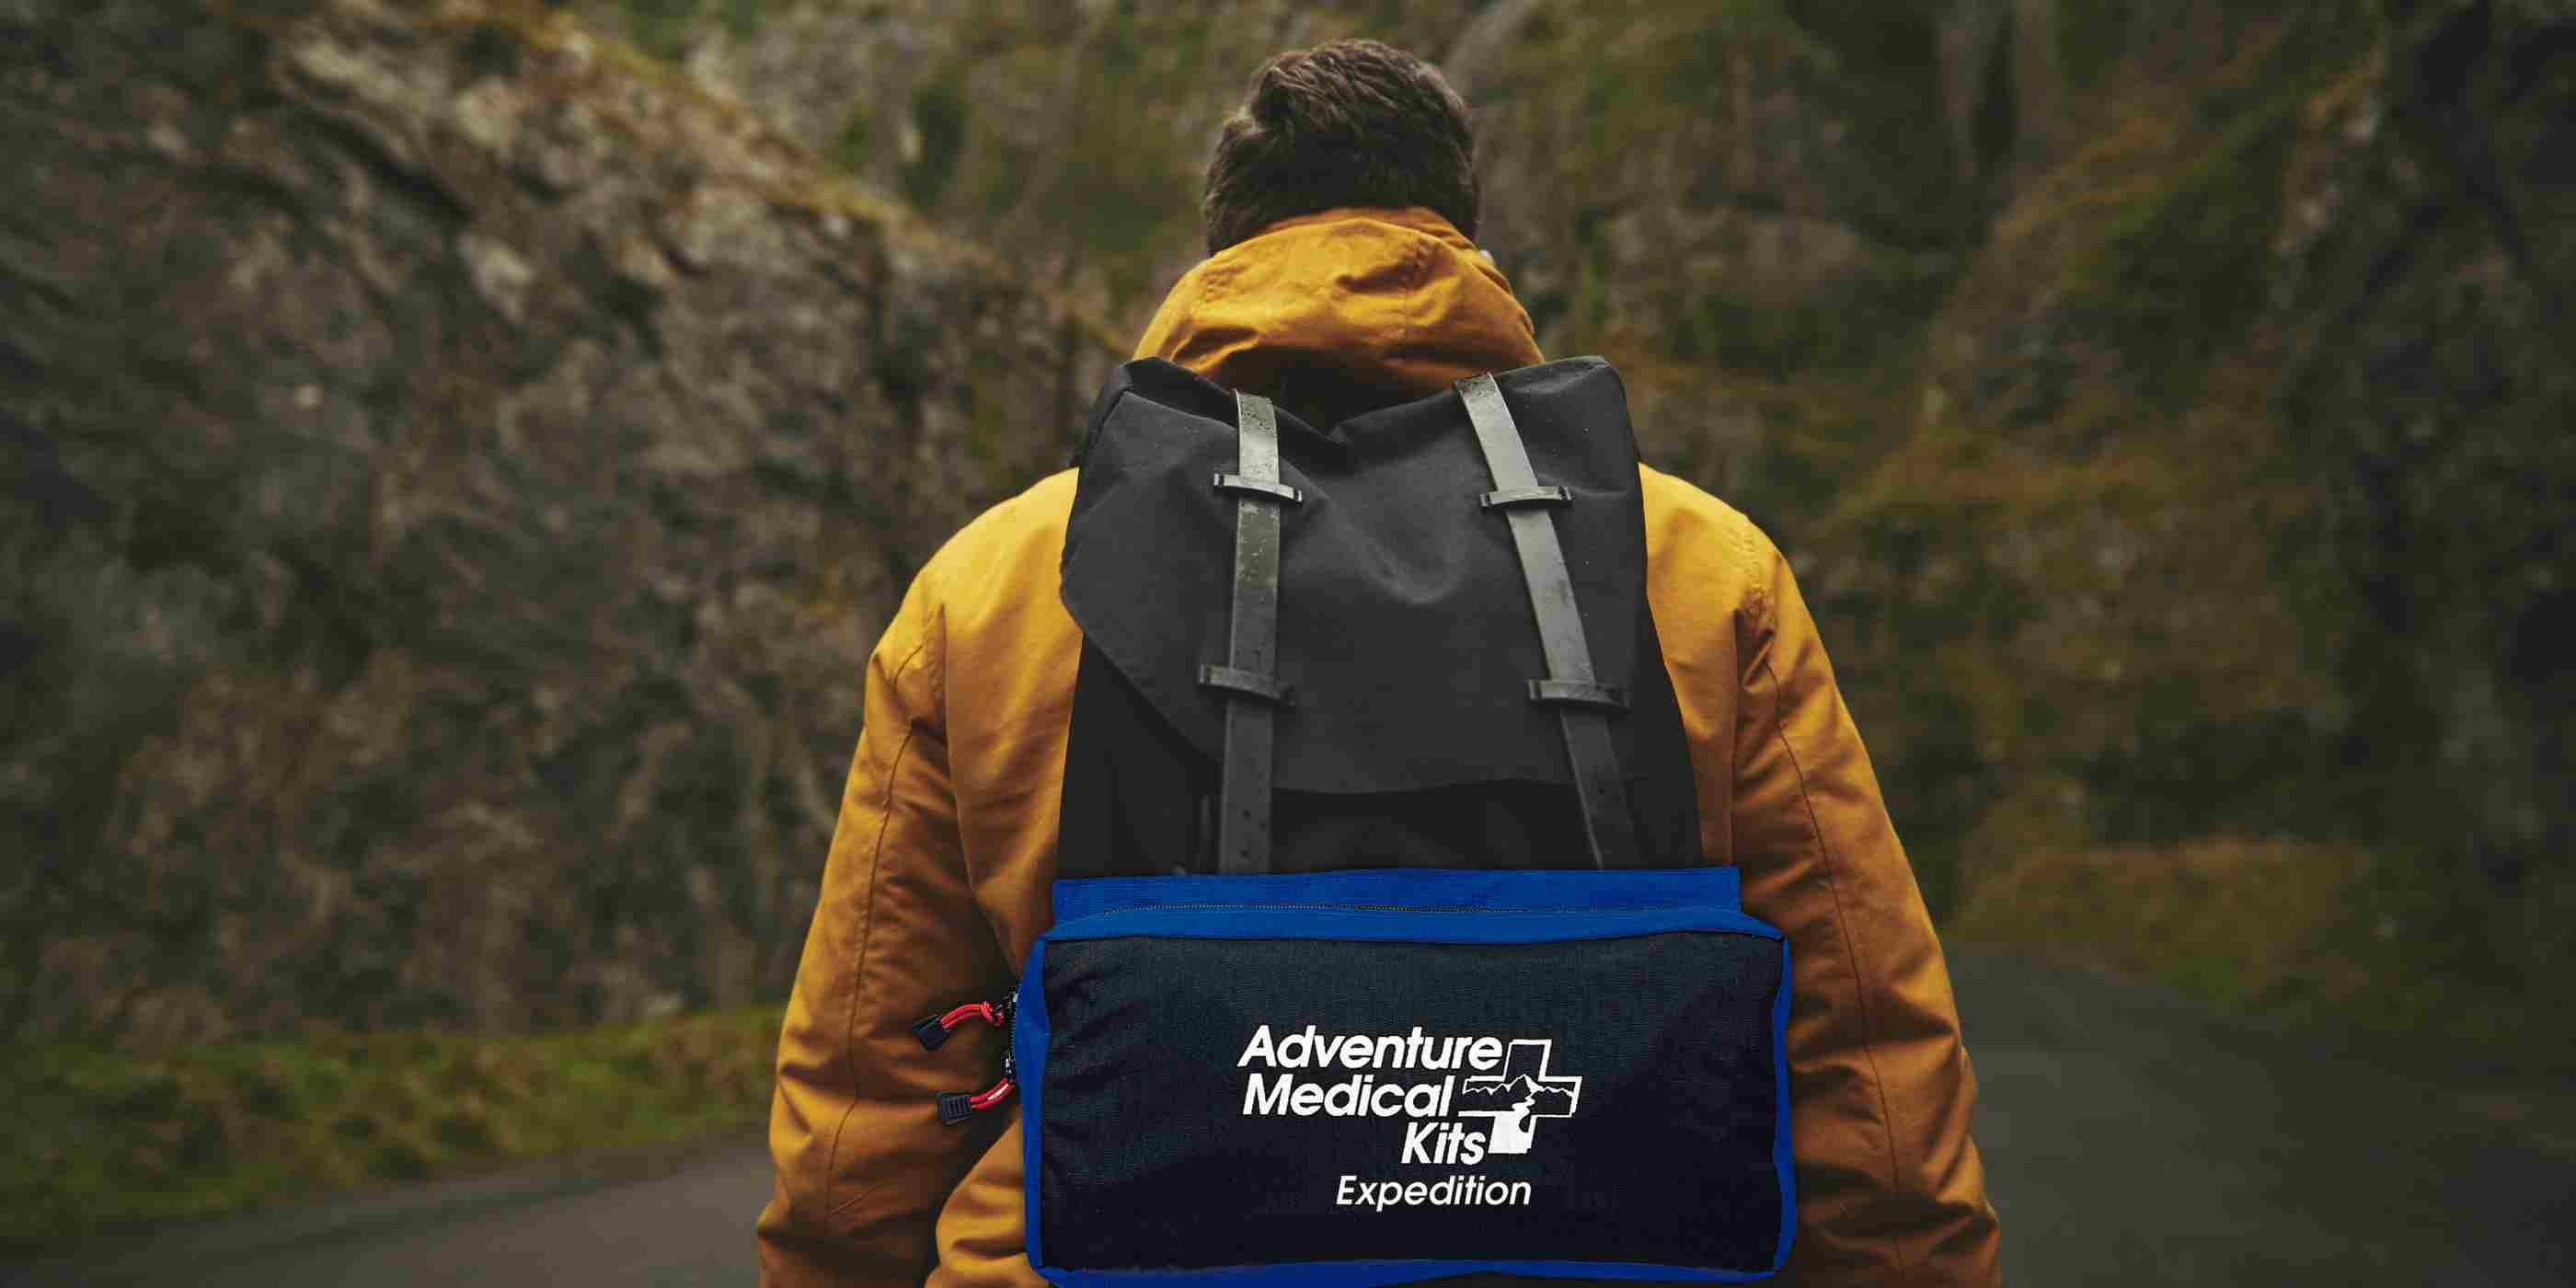 Pro Series Emergency Medical Kit - Expedition kit on person's backpack while hiking